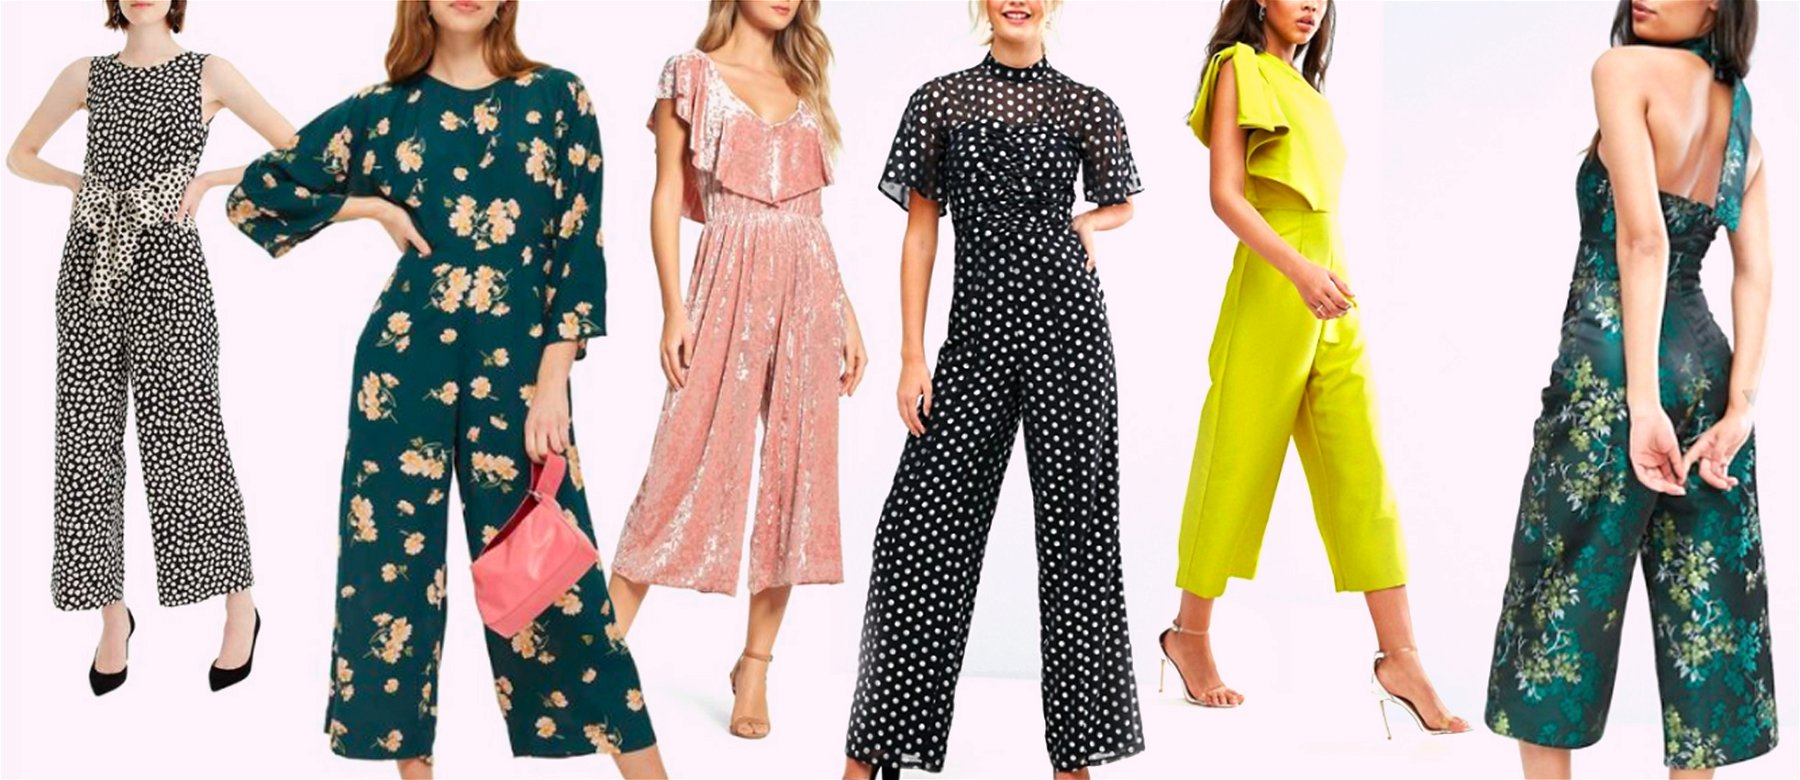 DRESSES UNDER $100 // FOR ALL OCCASIONS - Atlantic-Pacific